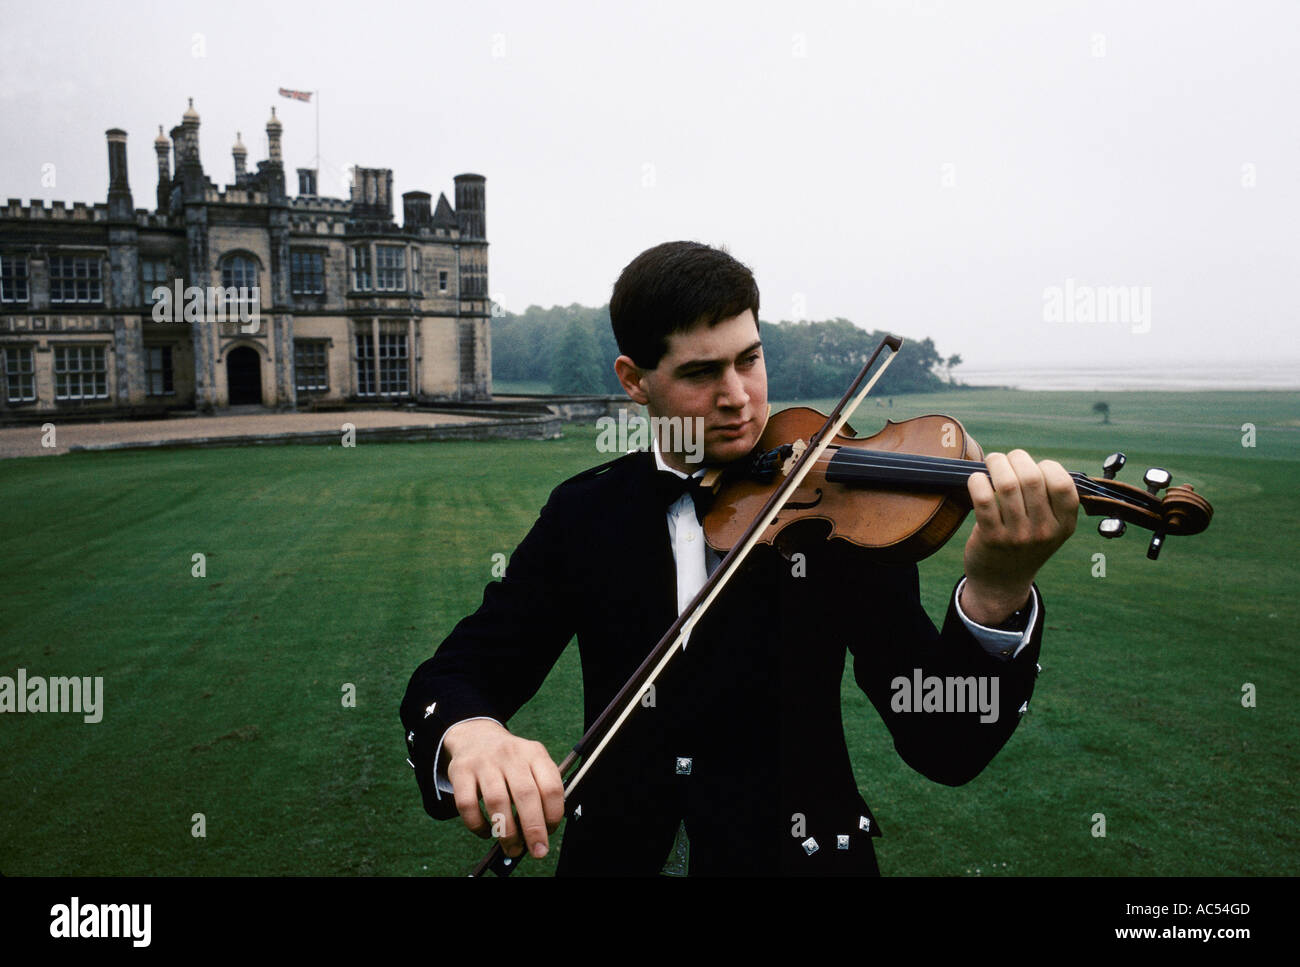 DALMENY HOUSE SCOTLAND MARTIN DUNCAN THE PIPER PLAYING VIOLIN OUTSIDE IN FRONT OF THE HOUSE JULY 1992 Stock Photo